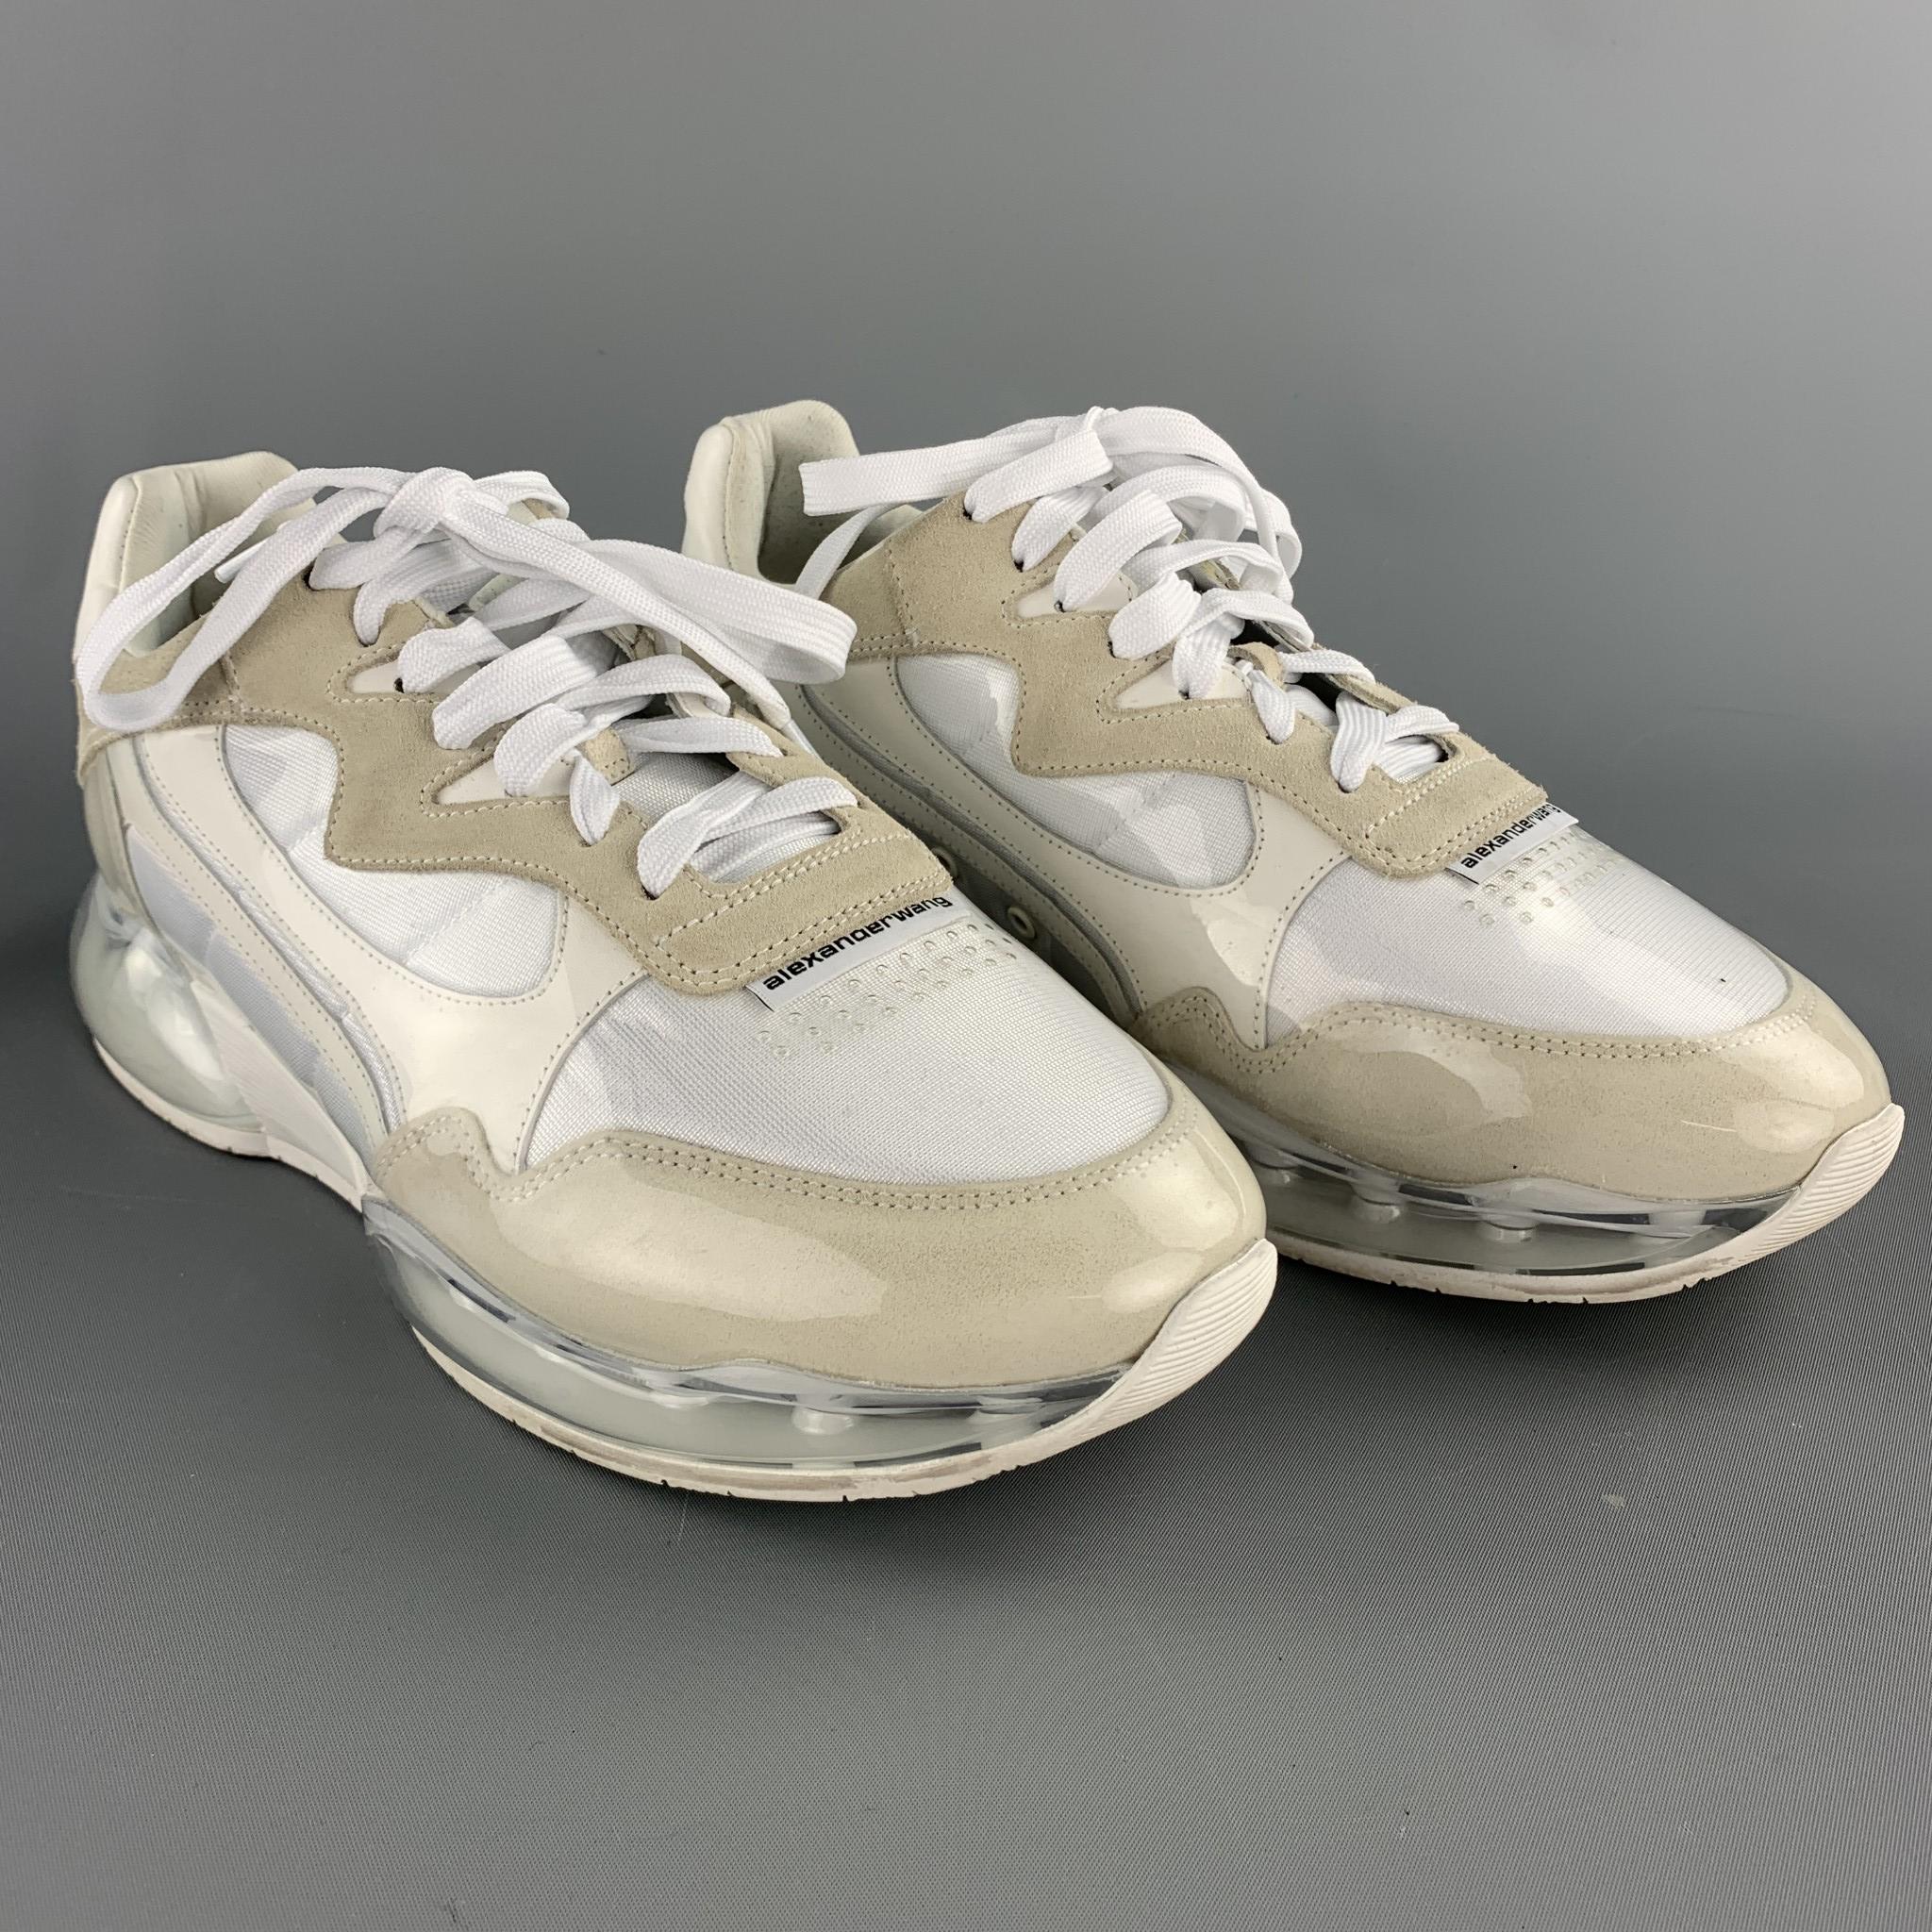 ALEXANDER WANG sneakers comes in a white mixed materials with a suede trim featuring a lace up style and a clear rubber sole. Minor spots. As-Is. Made in Italy.

Good Pre-Owned Condition.
Marked: 42.5

Outsole:

11.5 in. x 4 in.

